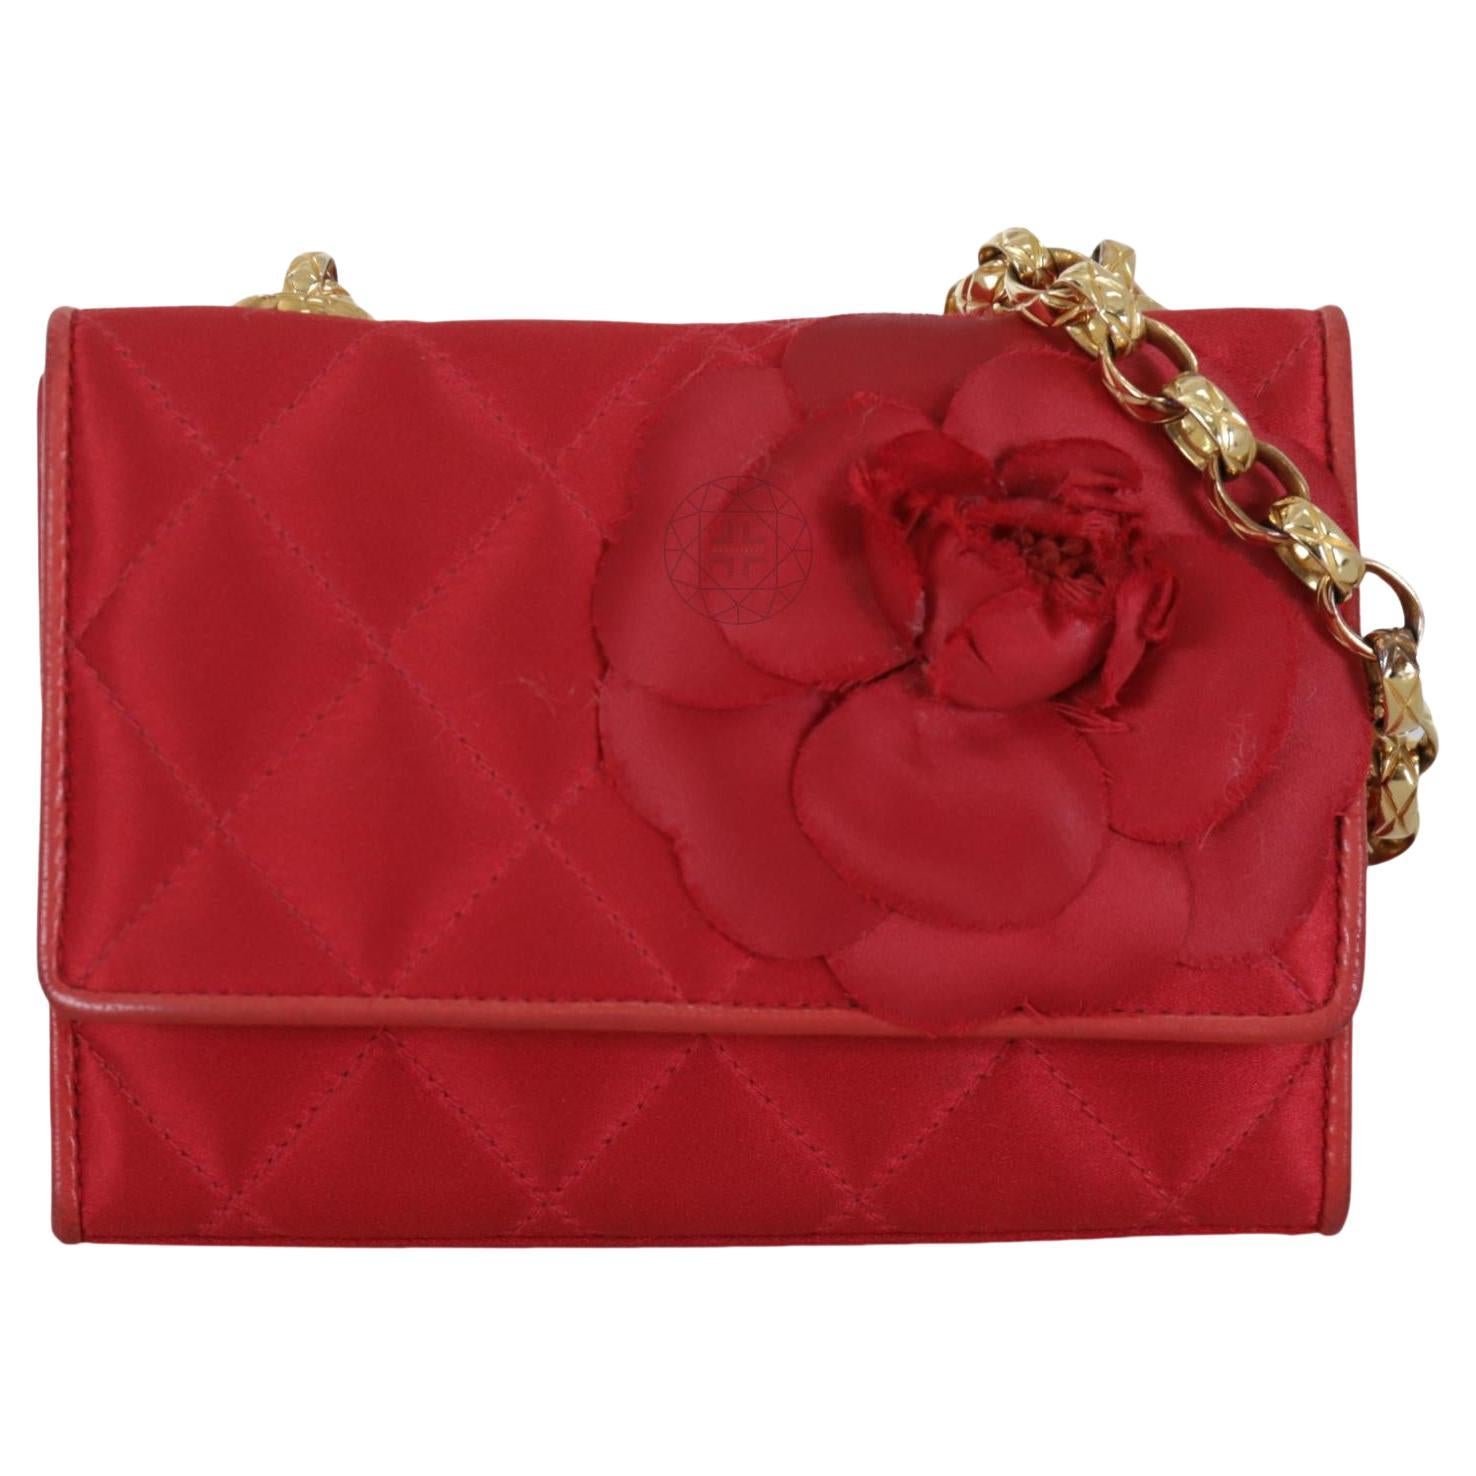 1990s Vintage Red Satin Quilted Camellia Mini Crossbody Bag For Sale